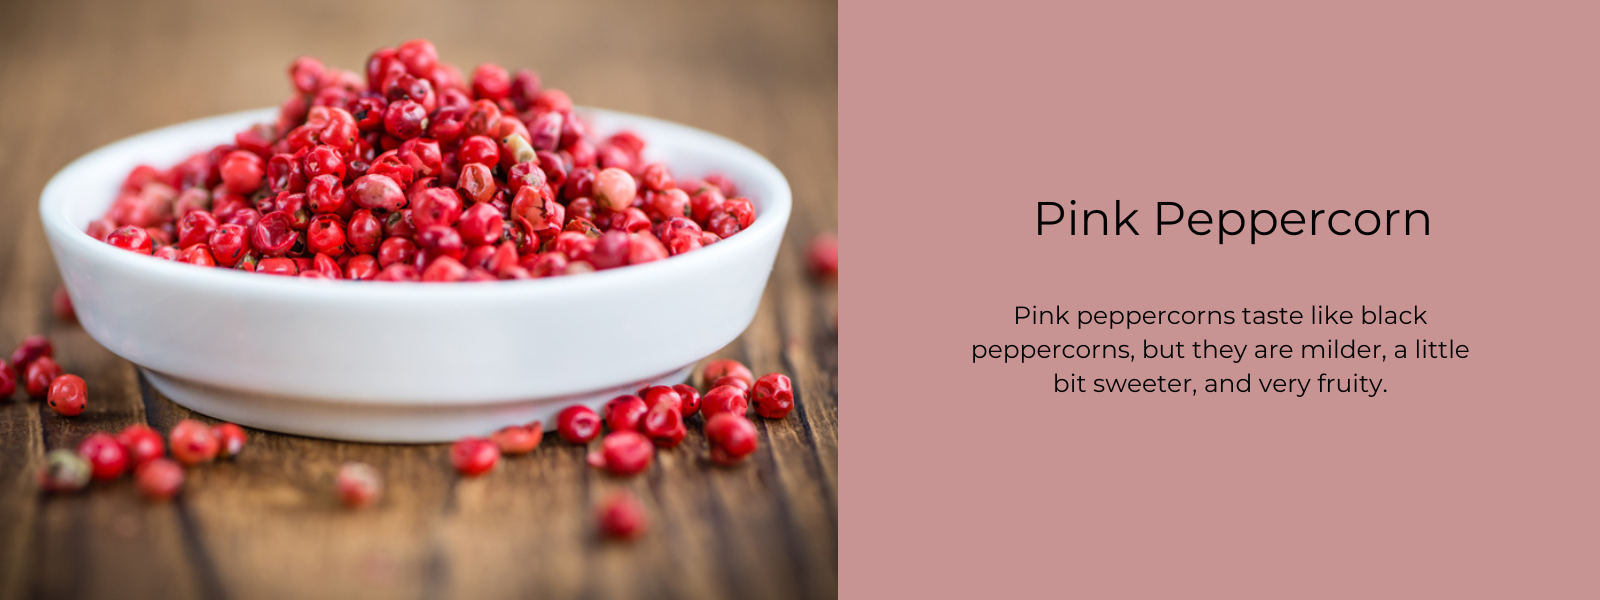 Pink Peppercorn - Health Benefits, Uses and Important Facts